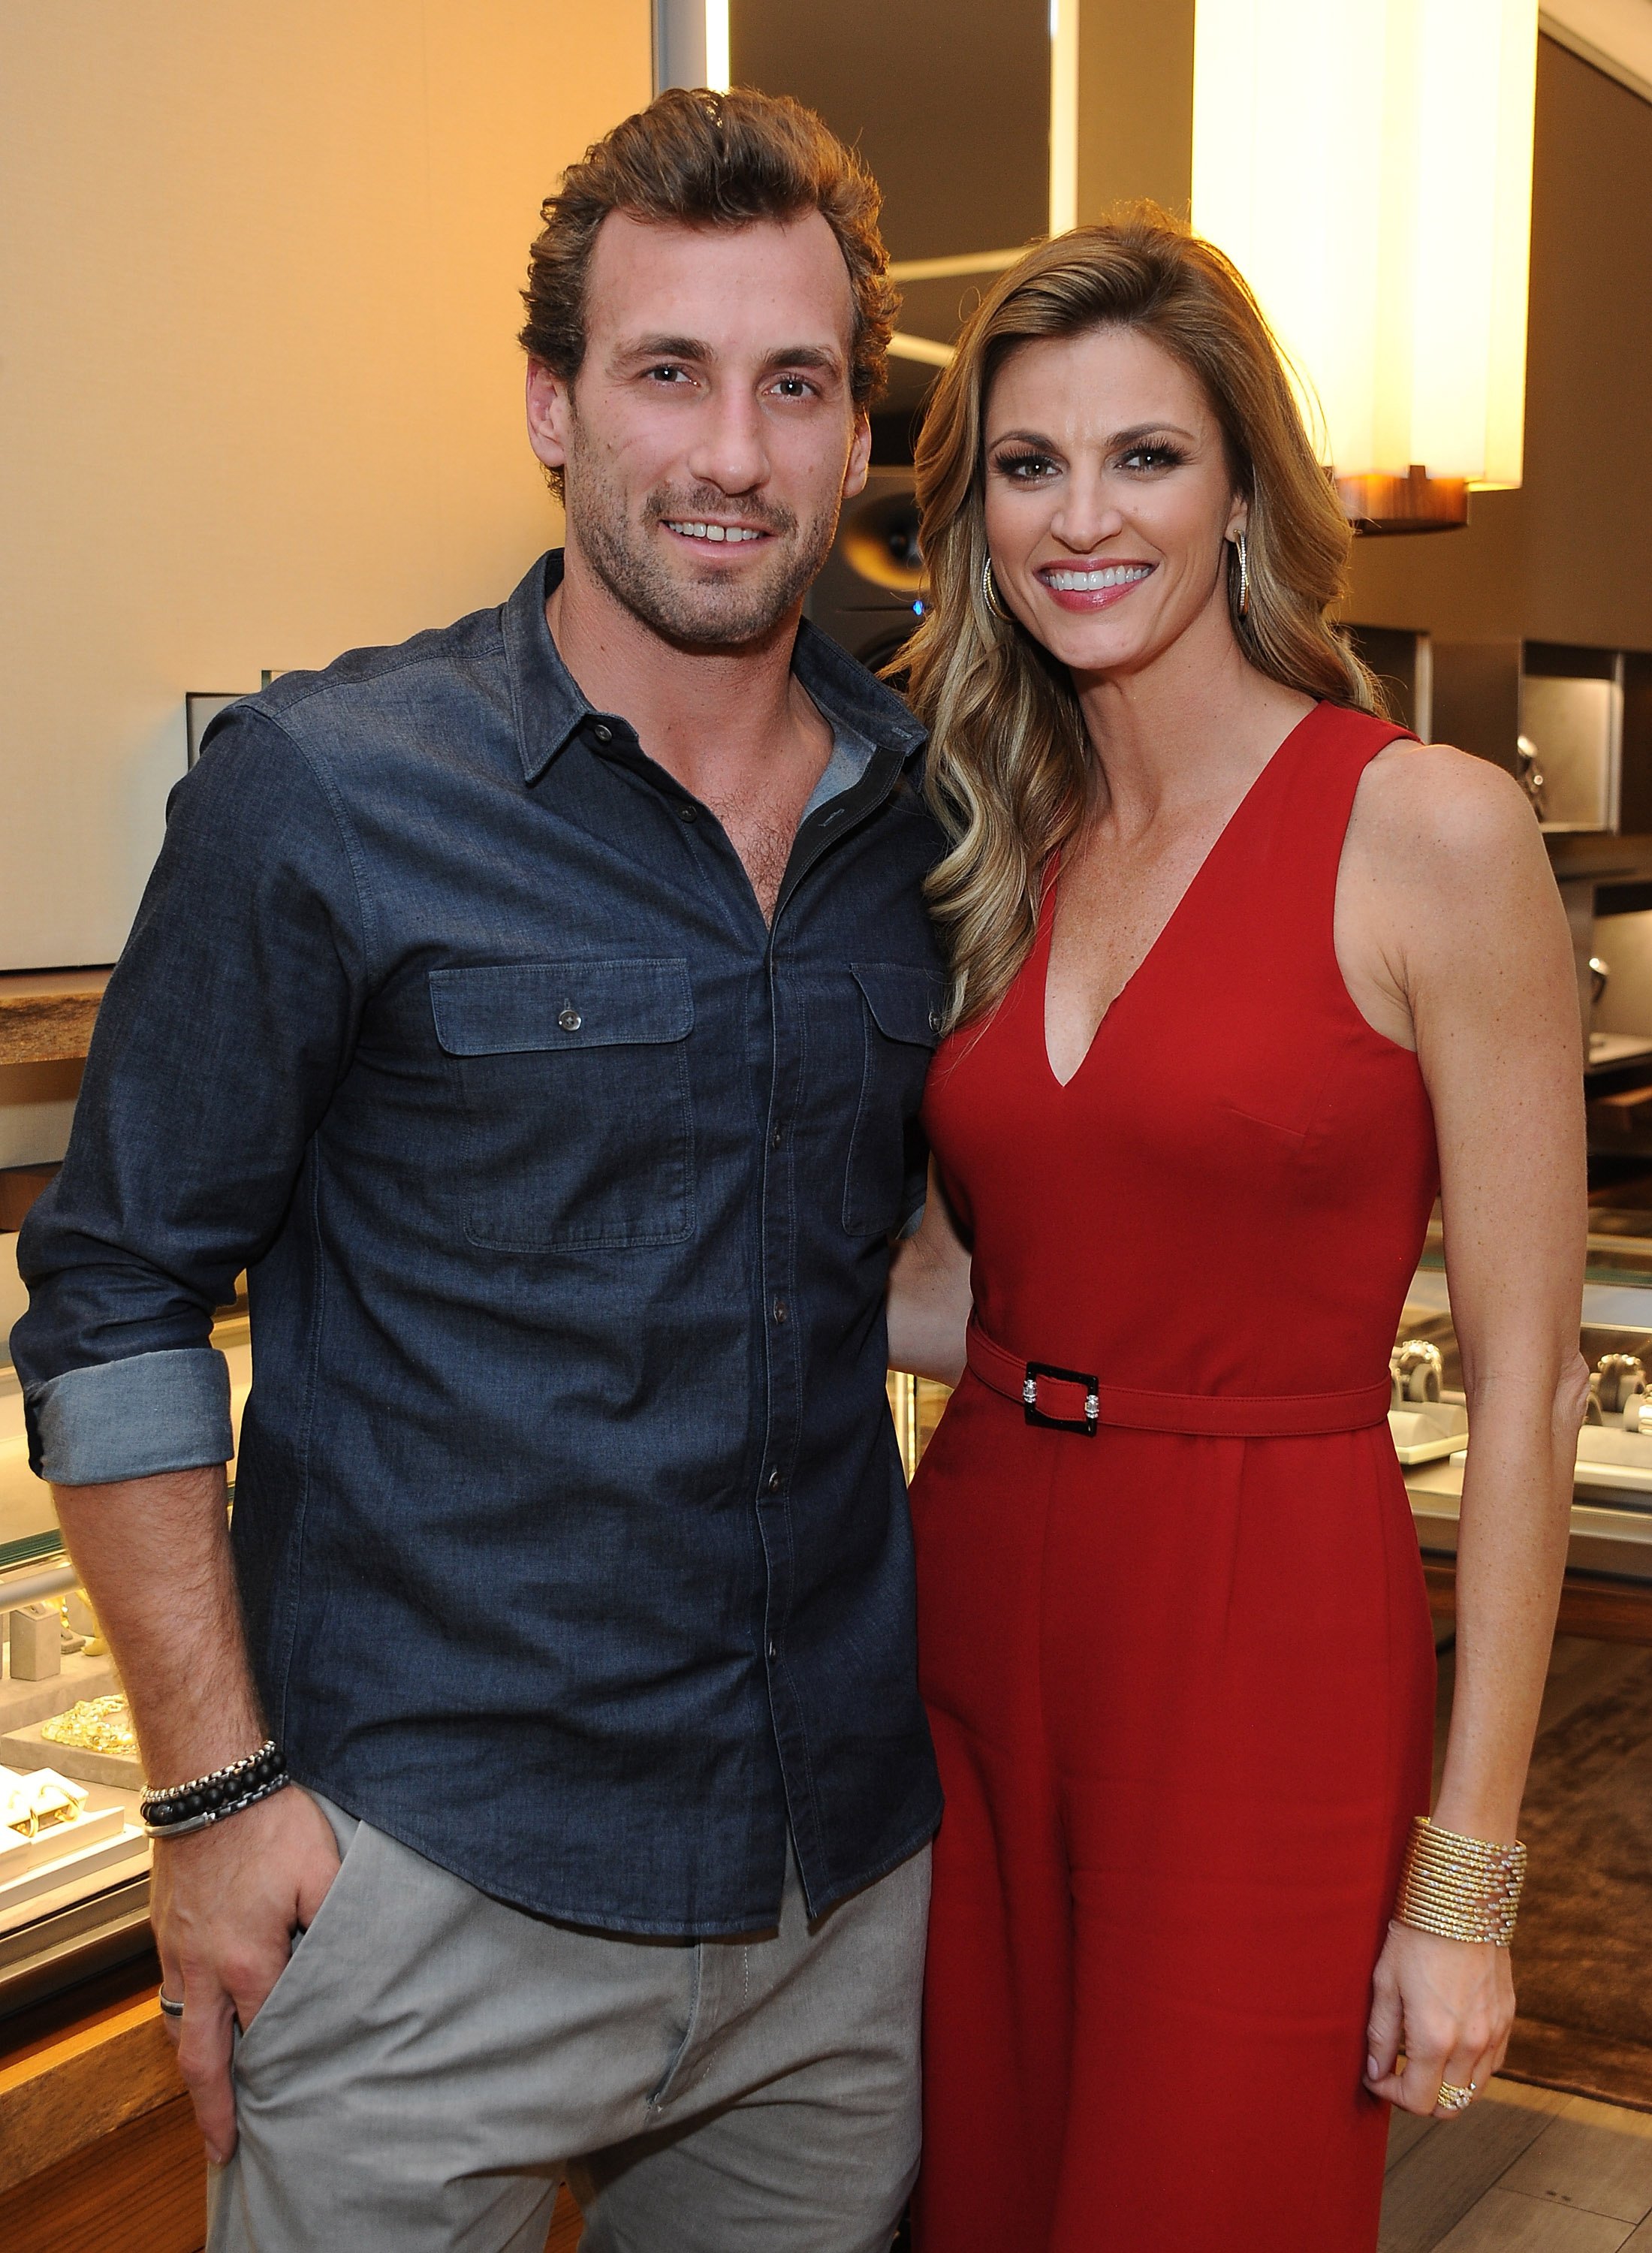 Jarret Stoll and Erin Andrews celebrate the launch of The Men's Forged Carbon Collection on November 10, 2014 | Photo: GettyImages